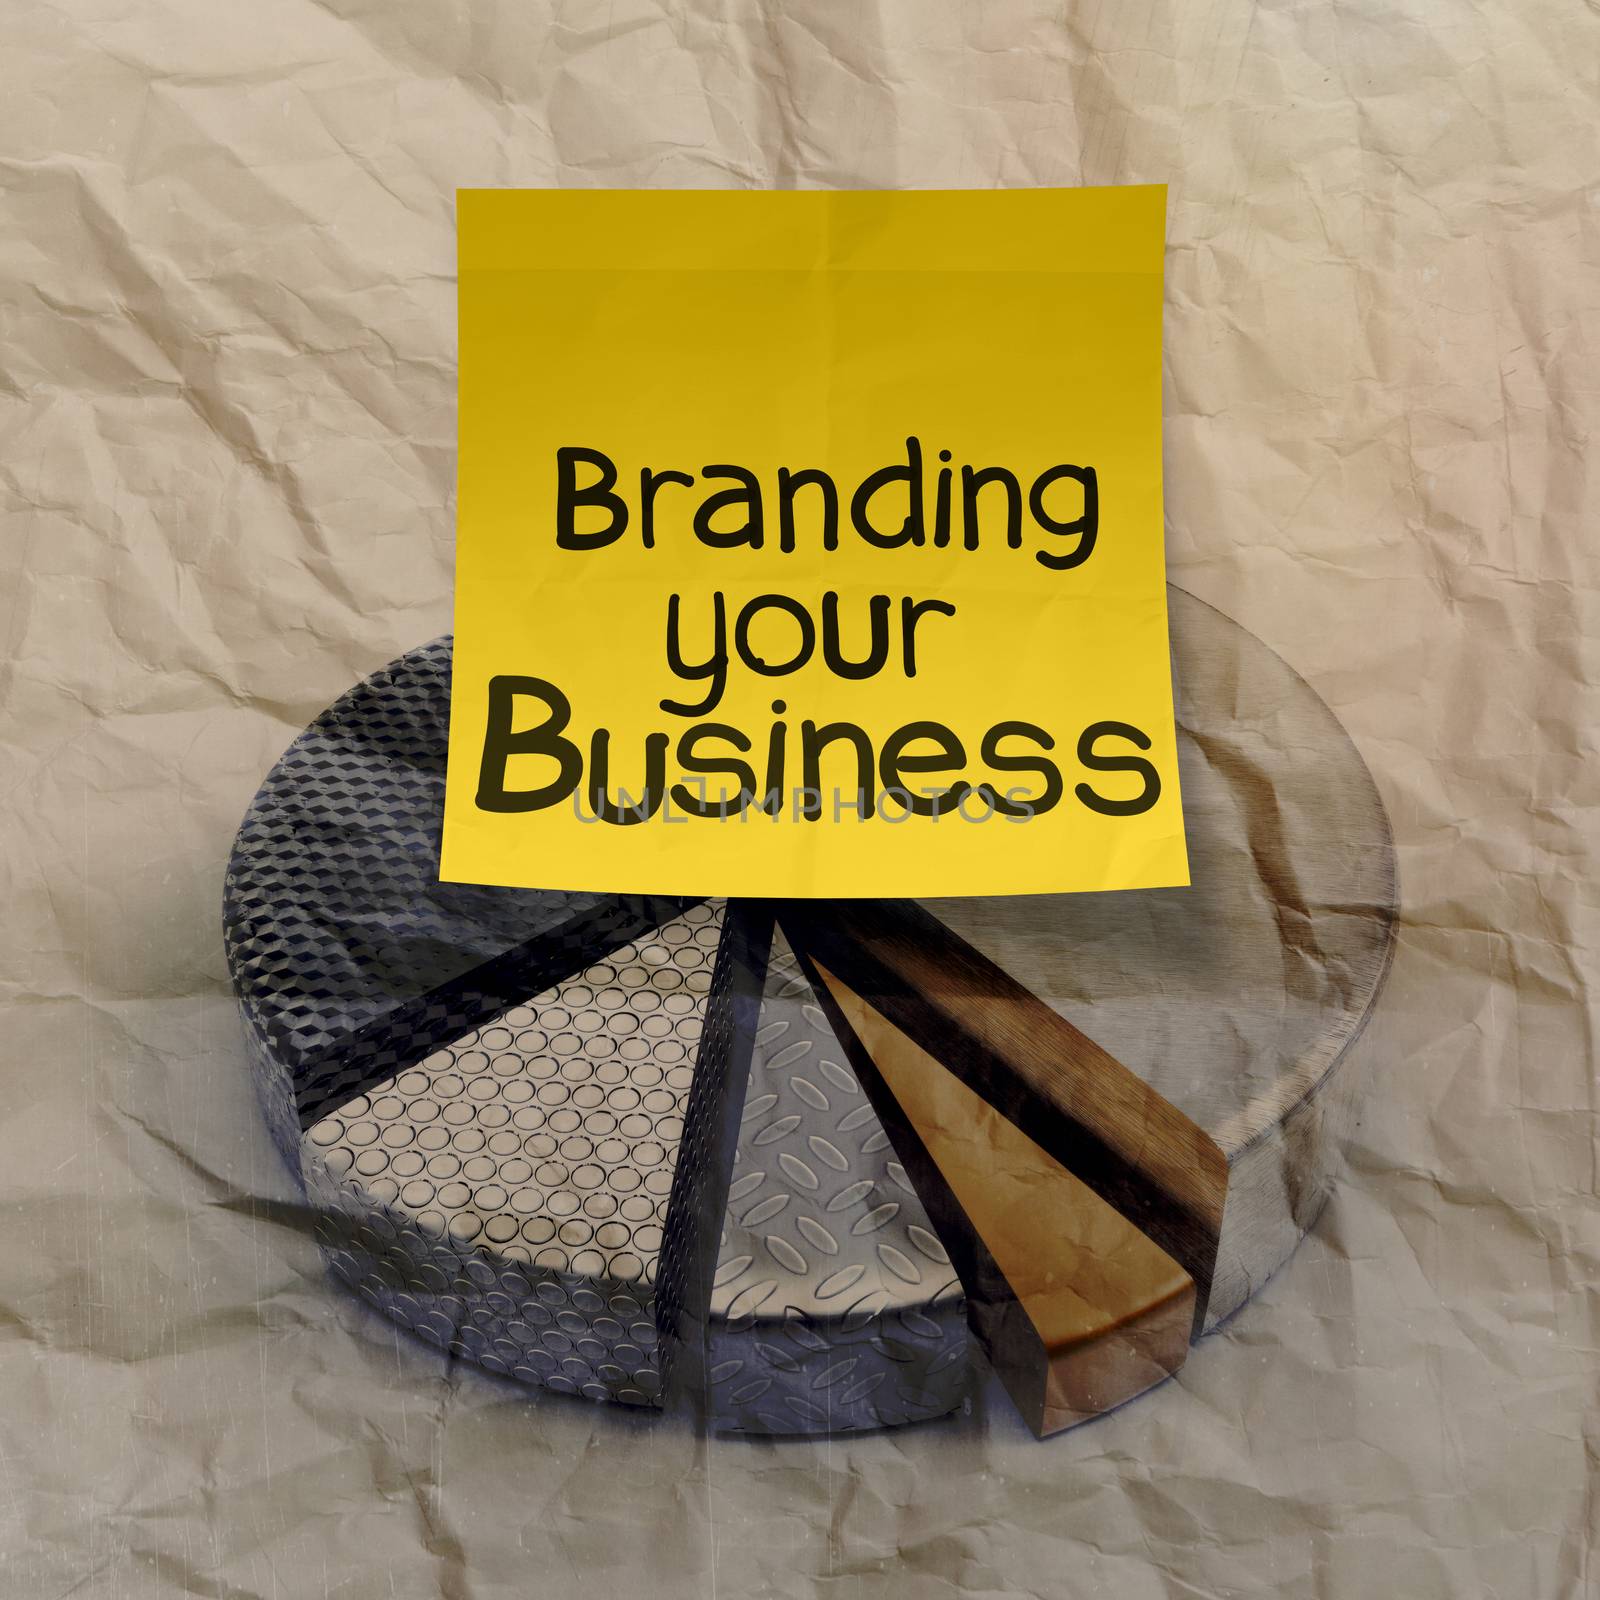  branding your business with pie chart crumpled recycle paper as concept